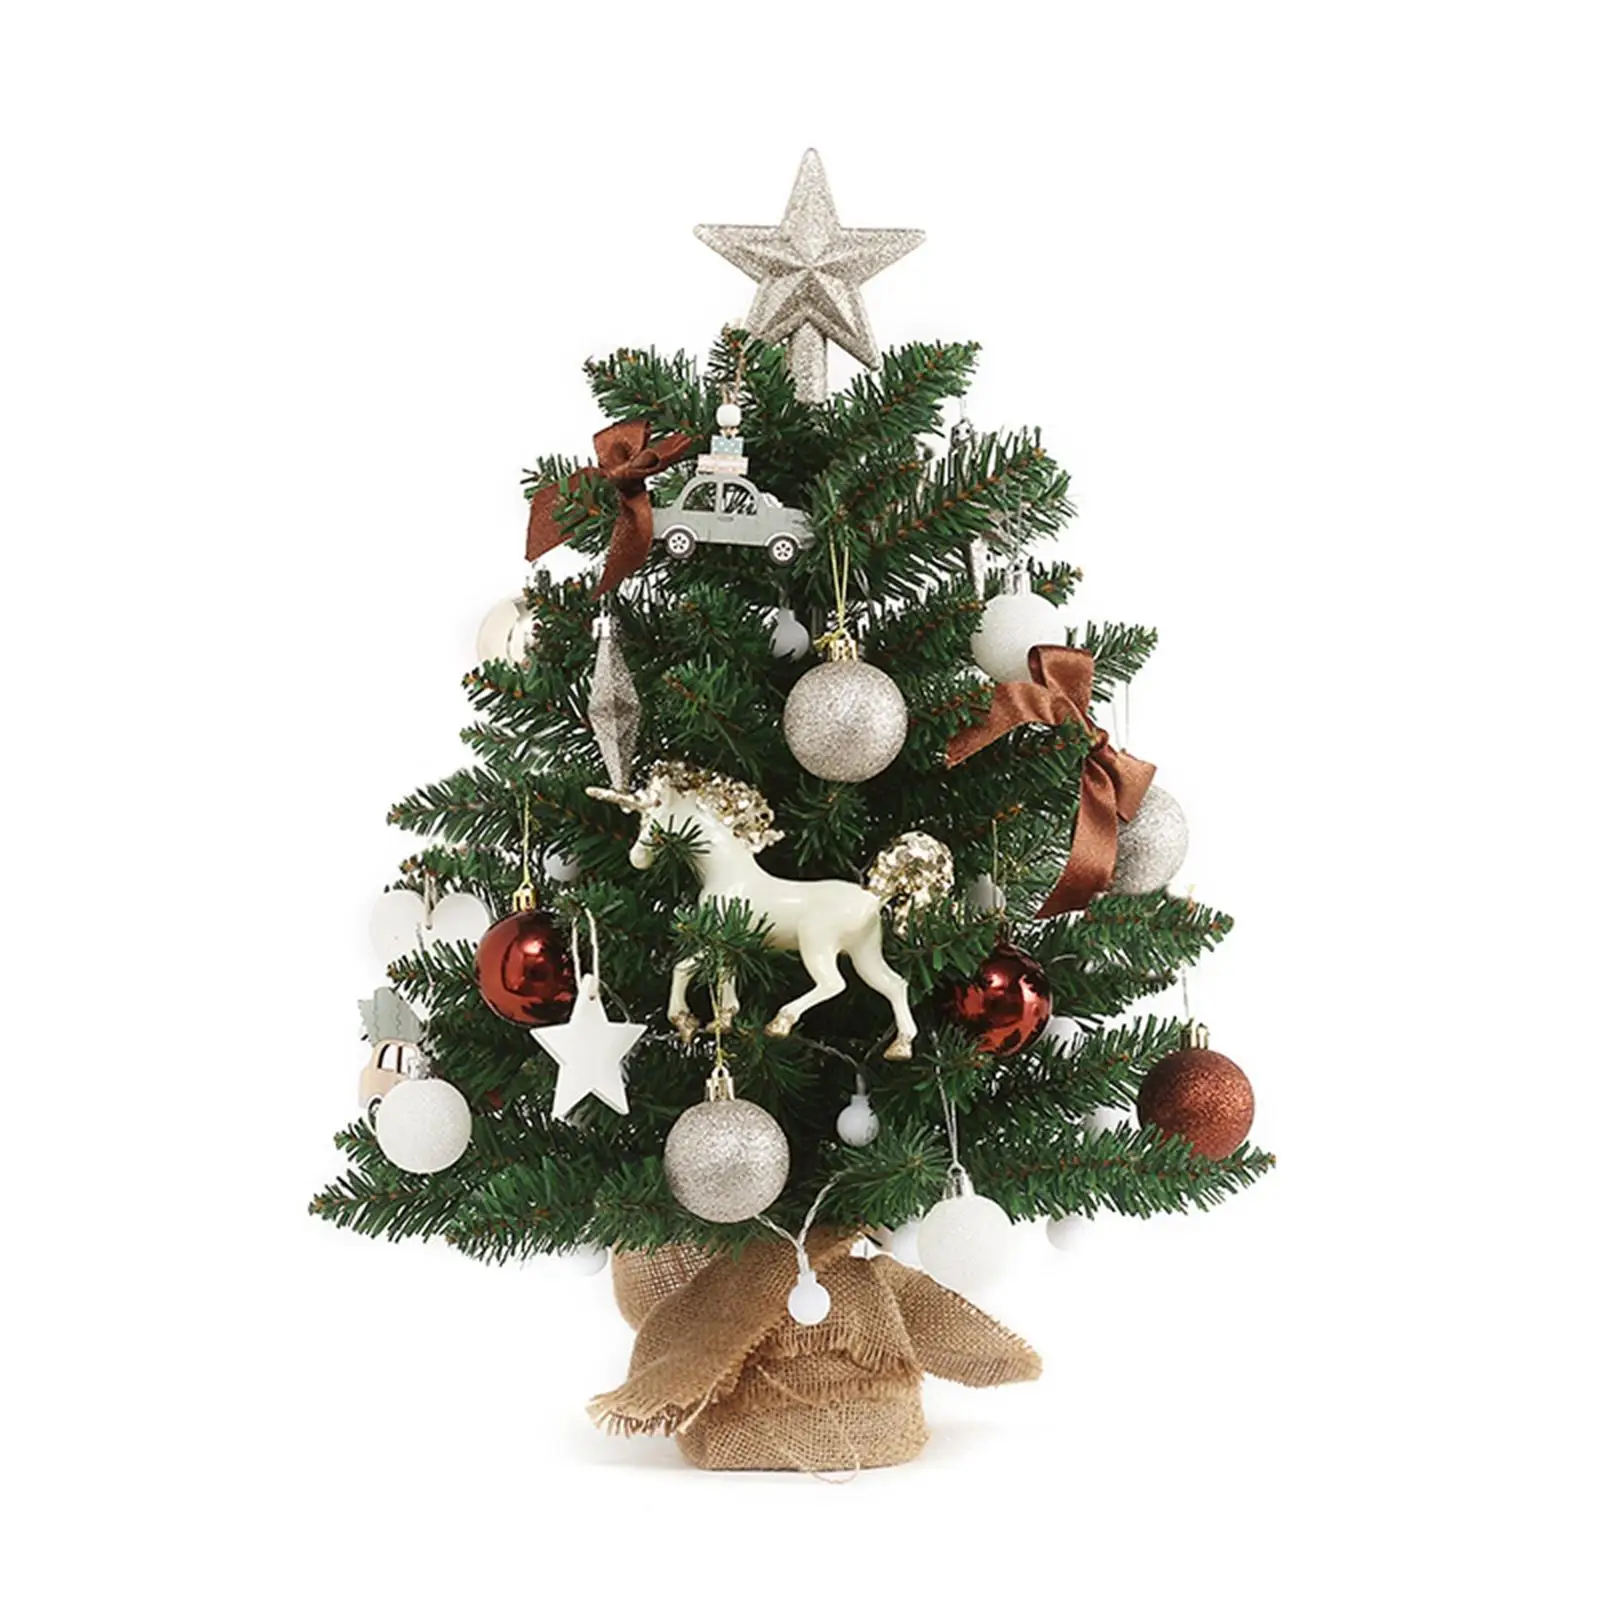 Mini Christmas Tree Artificial Ornament 50cm Home Decors Centerpiece with Lights Photo Props PVC for holiday Office